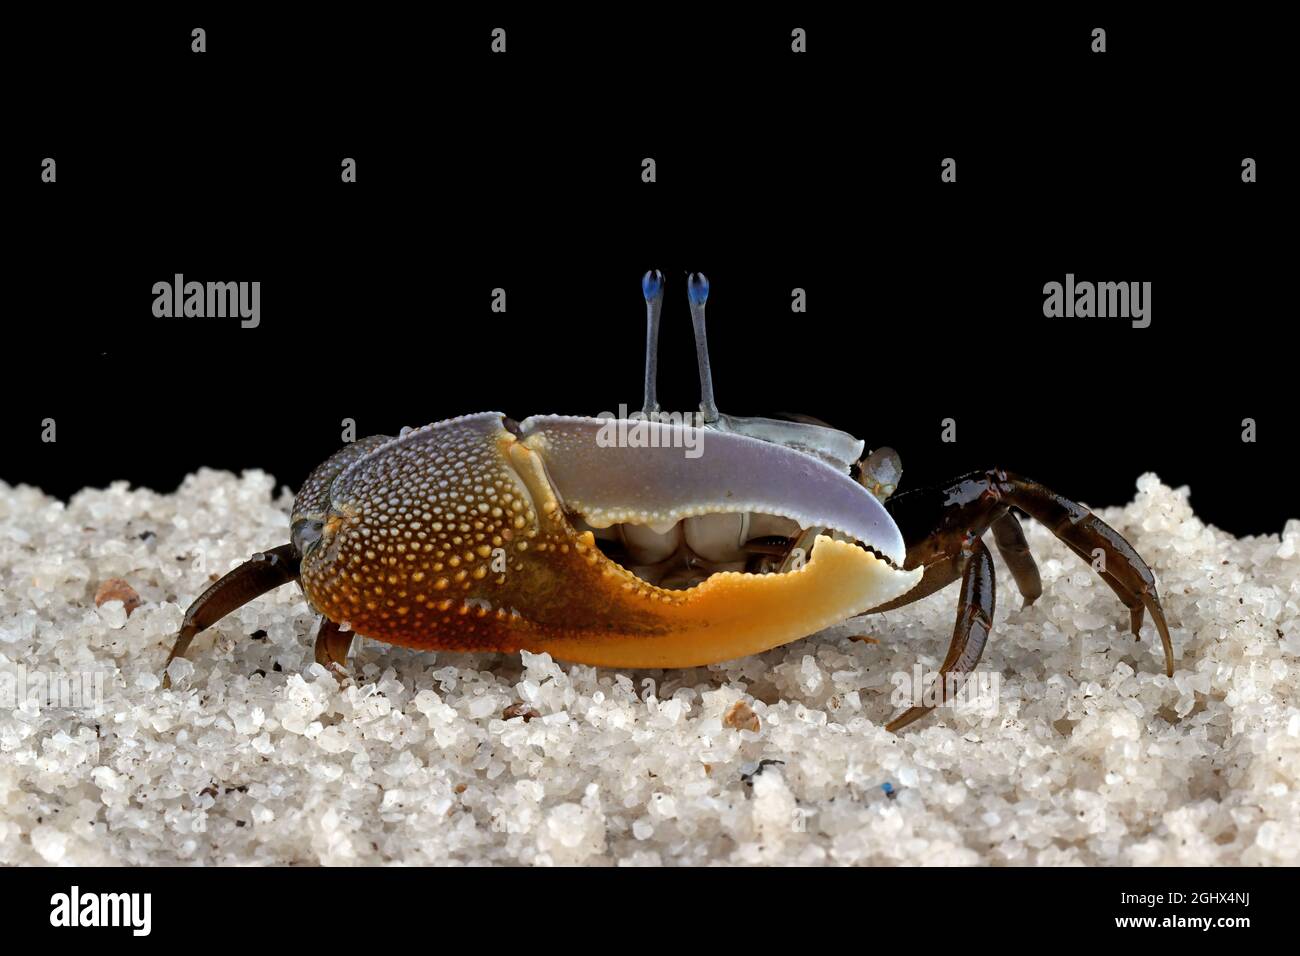 Close-up of a Fiddler crab on black background Stock Photo